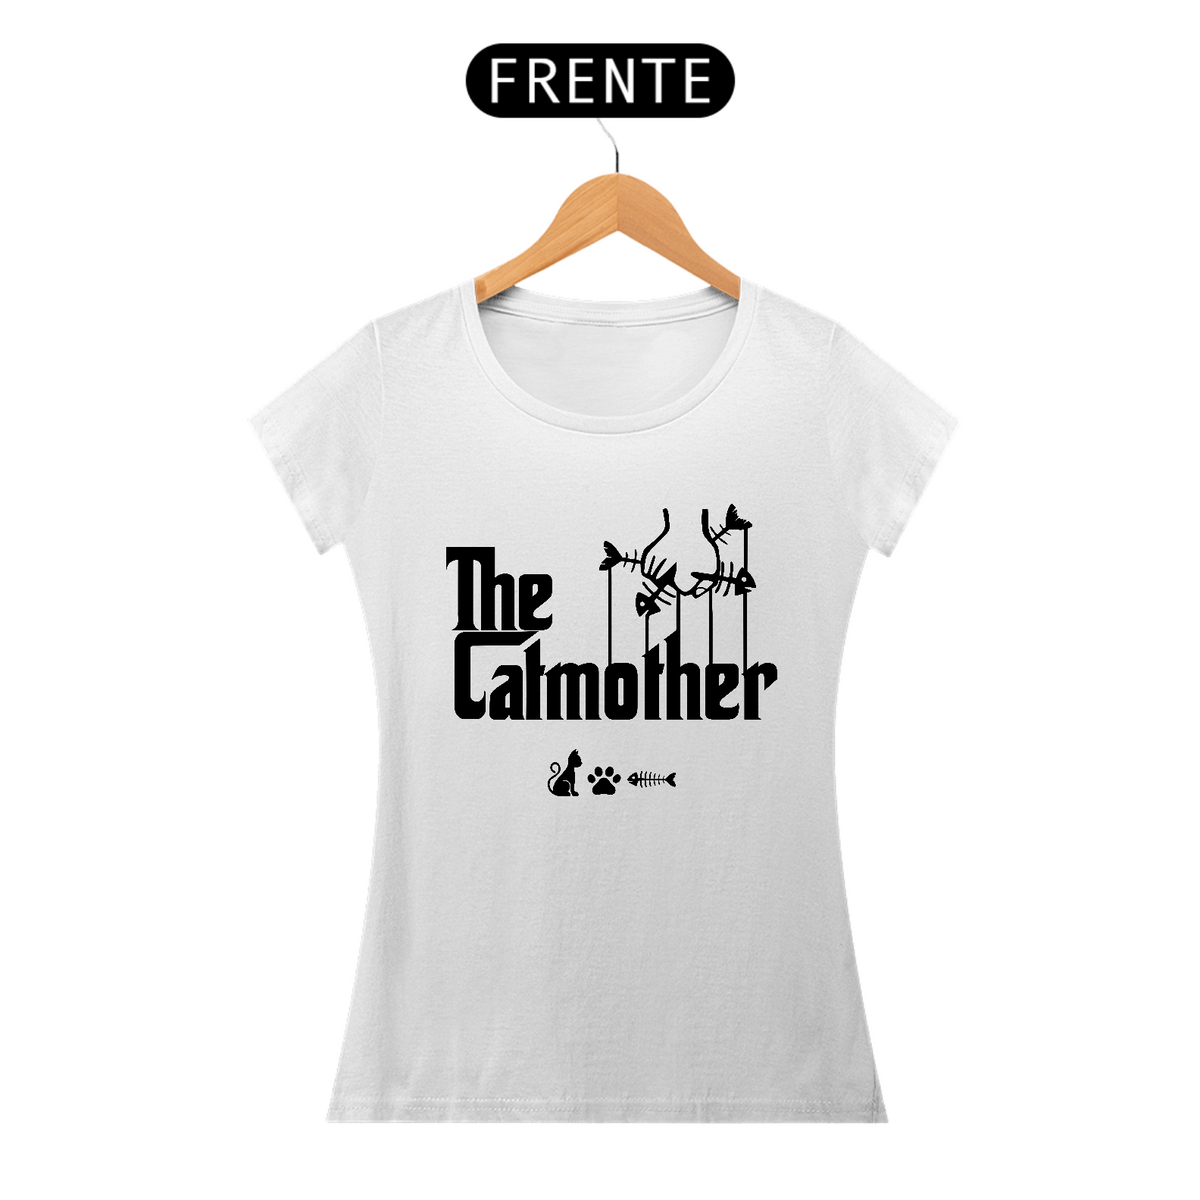 Nome do produto: Camisa Baby Long Classic Catmother